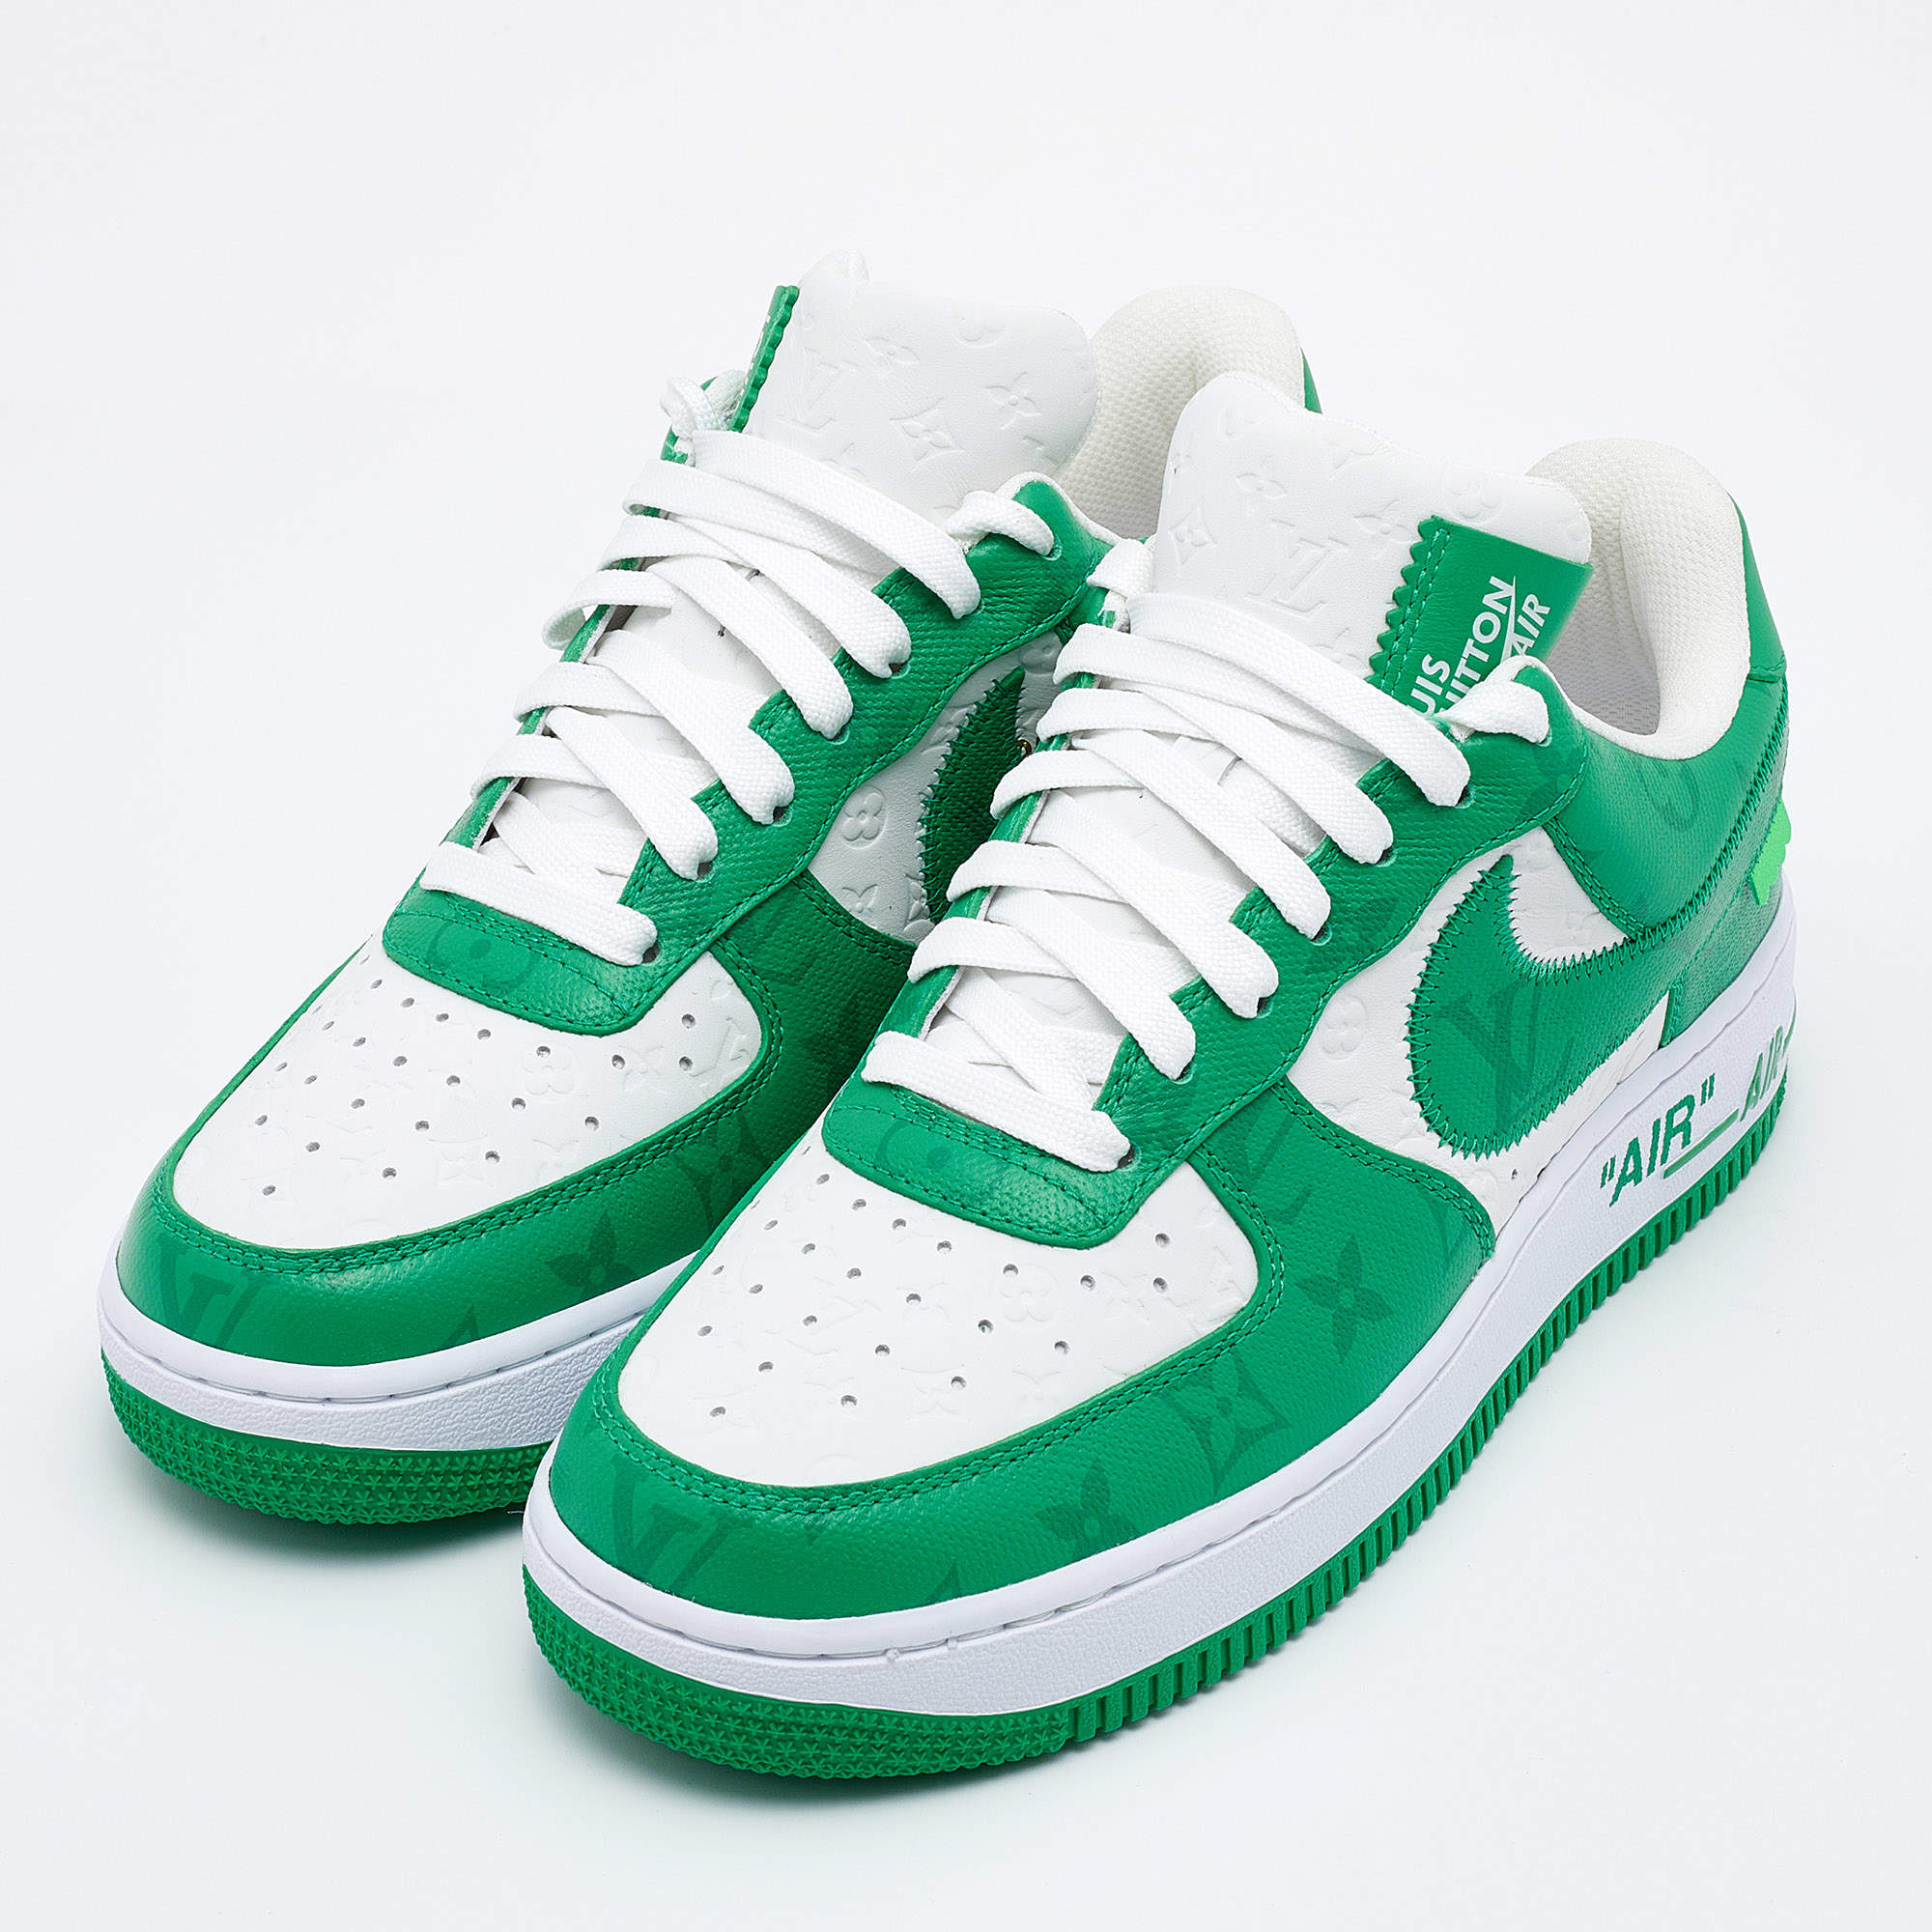 Louis Vuitton X Nike By Virgil Abloh Green/White Monogram Embossed Leather Nike  Air Force 1 Low Top Sneakers Size 39 Louis Vuitton